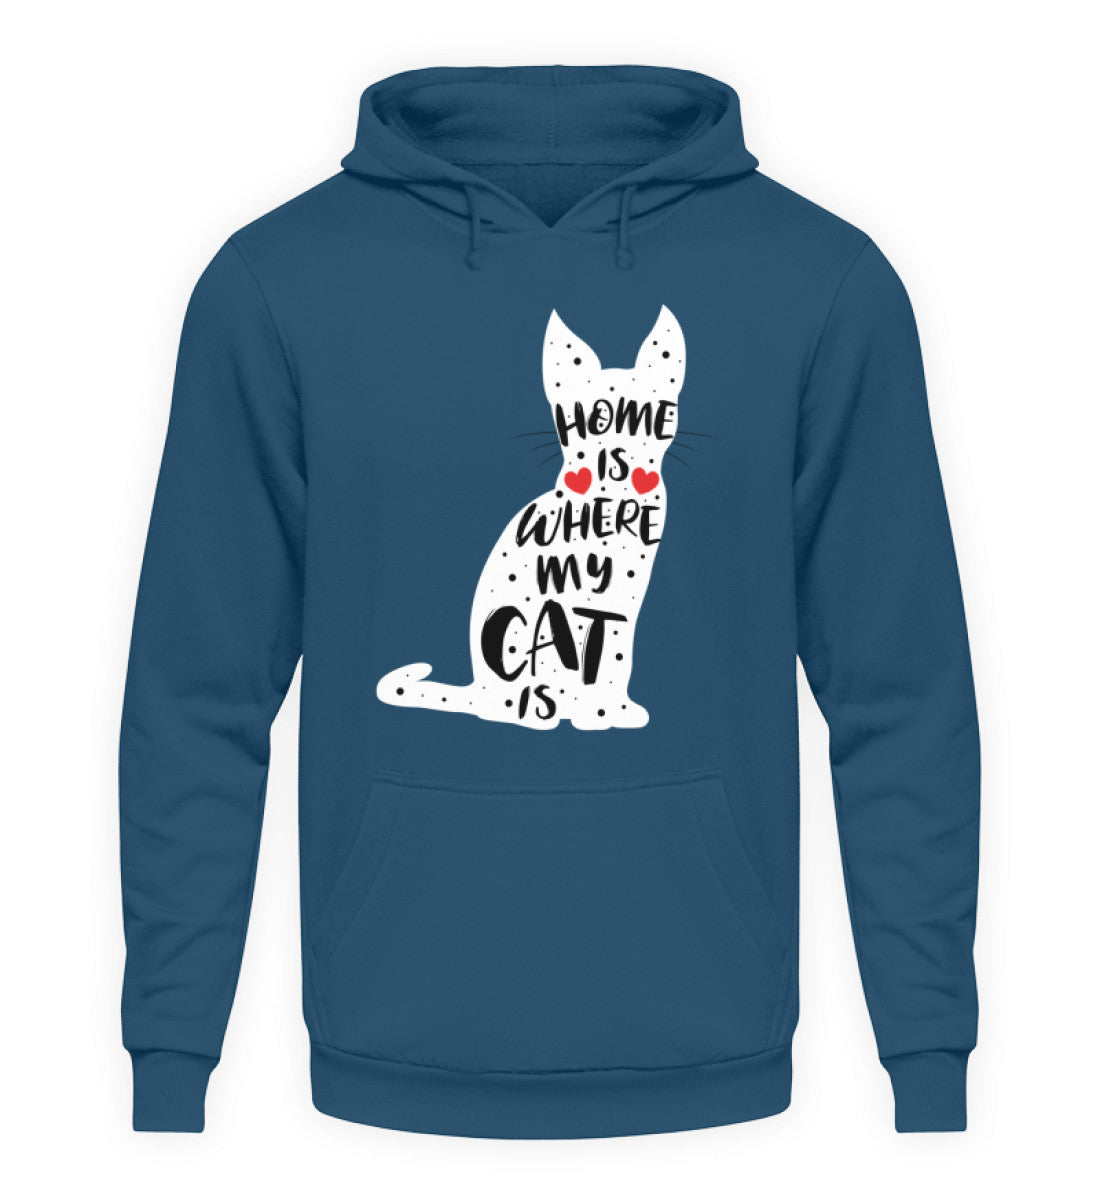 Zeigt home is where my cat is unisex kapuzenpullover hoodie in Farbe Jet Black